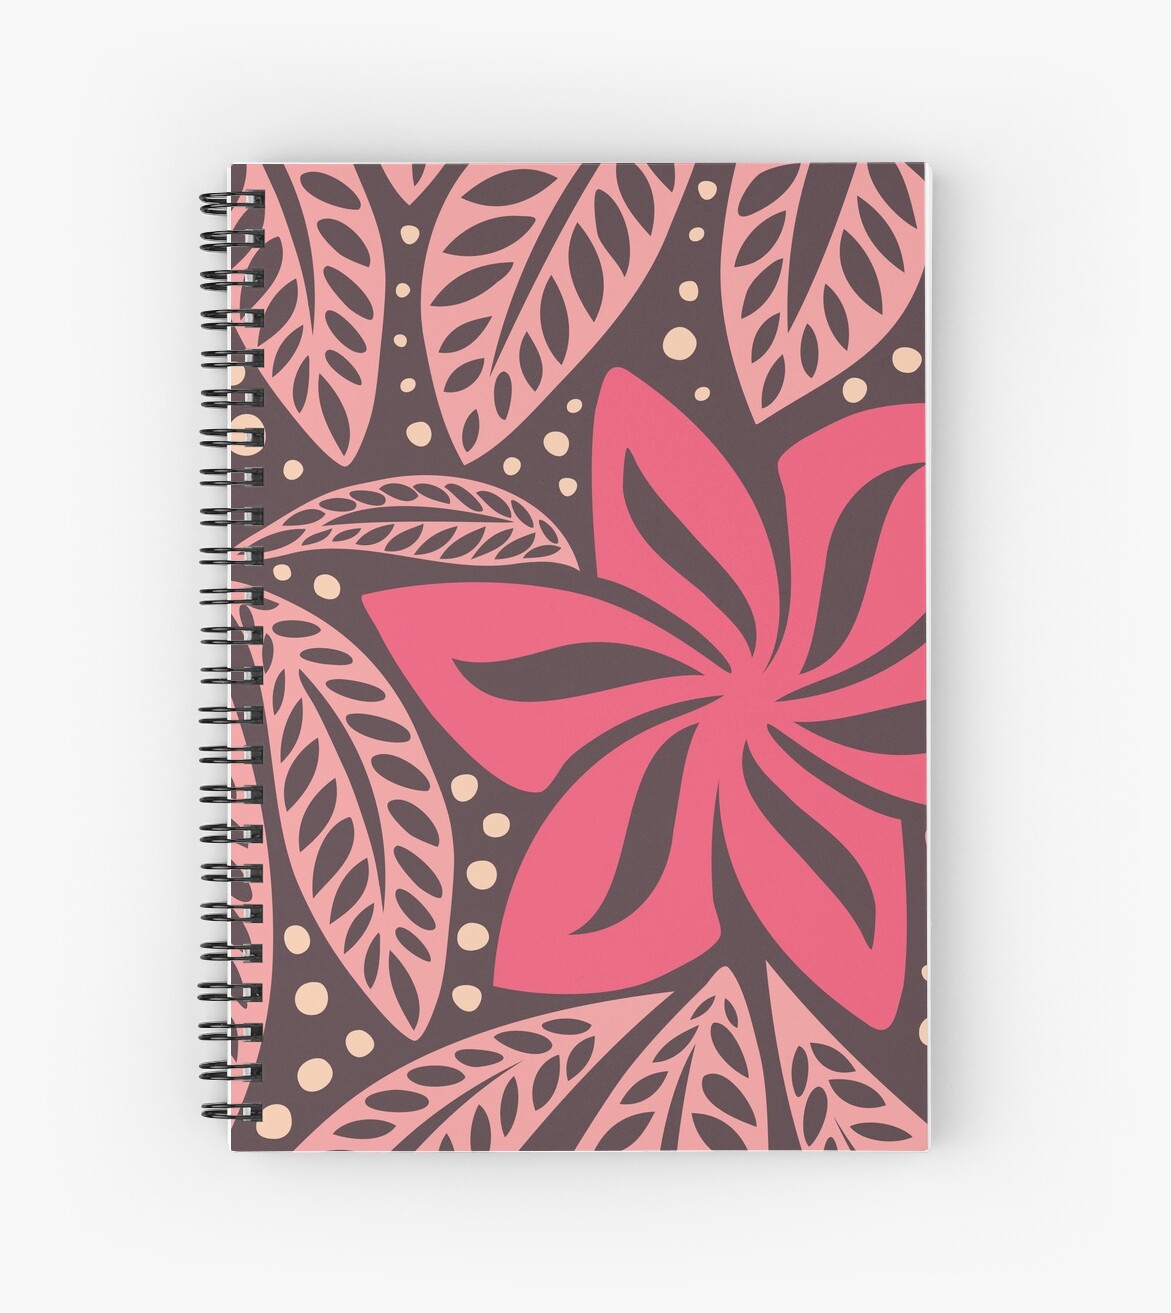 Polynesian Hawaiian Big Flower Pink Aubergine Floral Tattoo Design Spiral Notebook By Ayeletf Redbubble,What Do Horses Eat